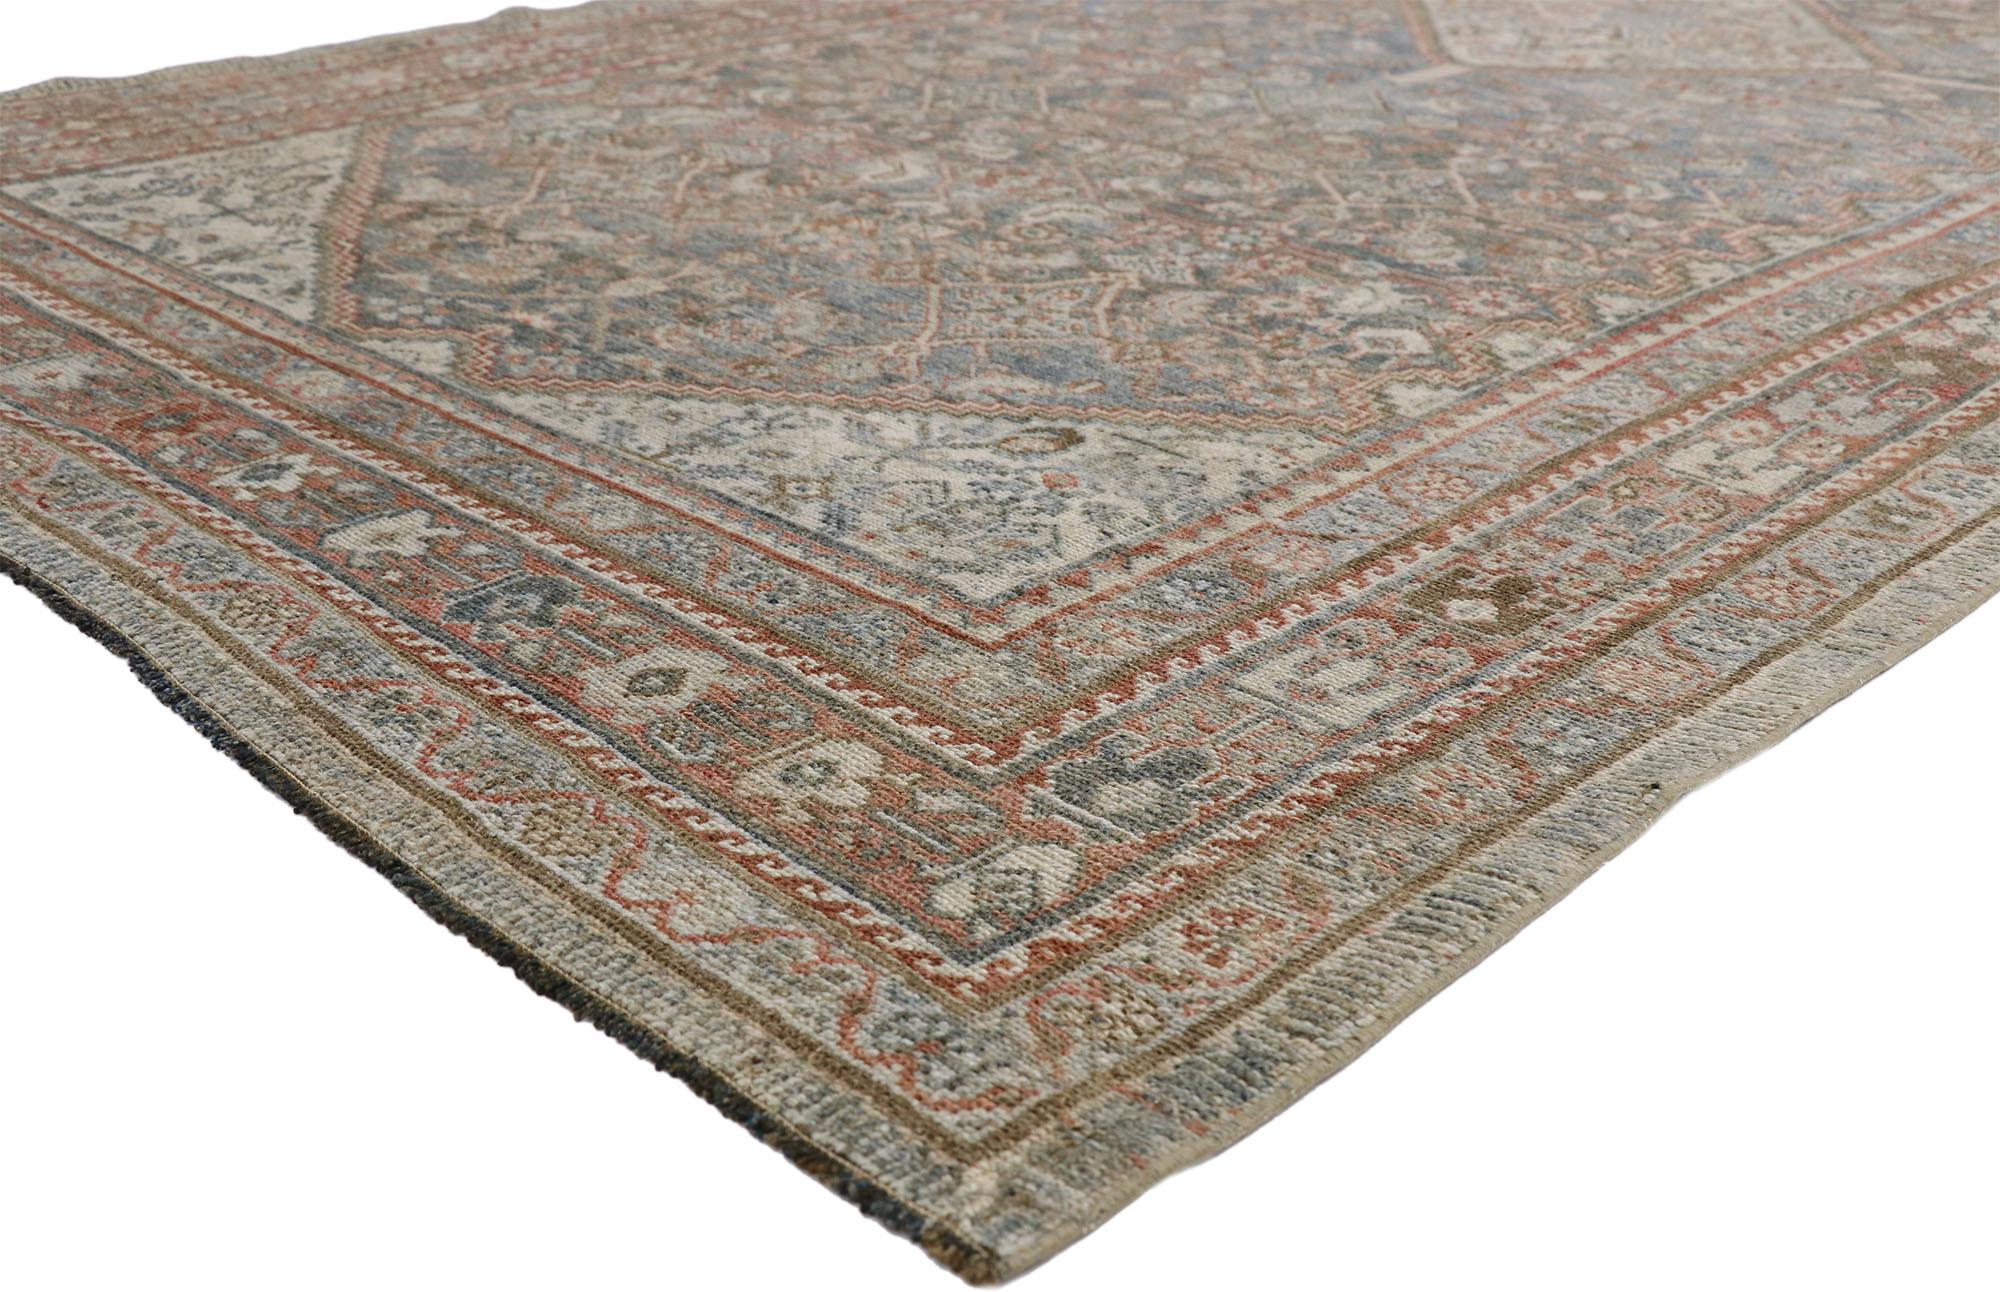 52551, distressed antique Persian Malayer style Gallery rug with Rustic Craftsman style. With its geometric pattern, subdued colors and time-worn composition, this hand knotted wool distressed antique Persian Design gallery rug embodies a rustic